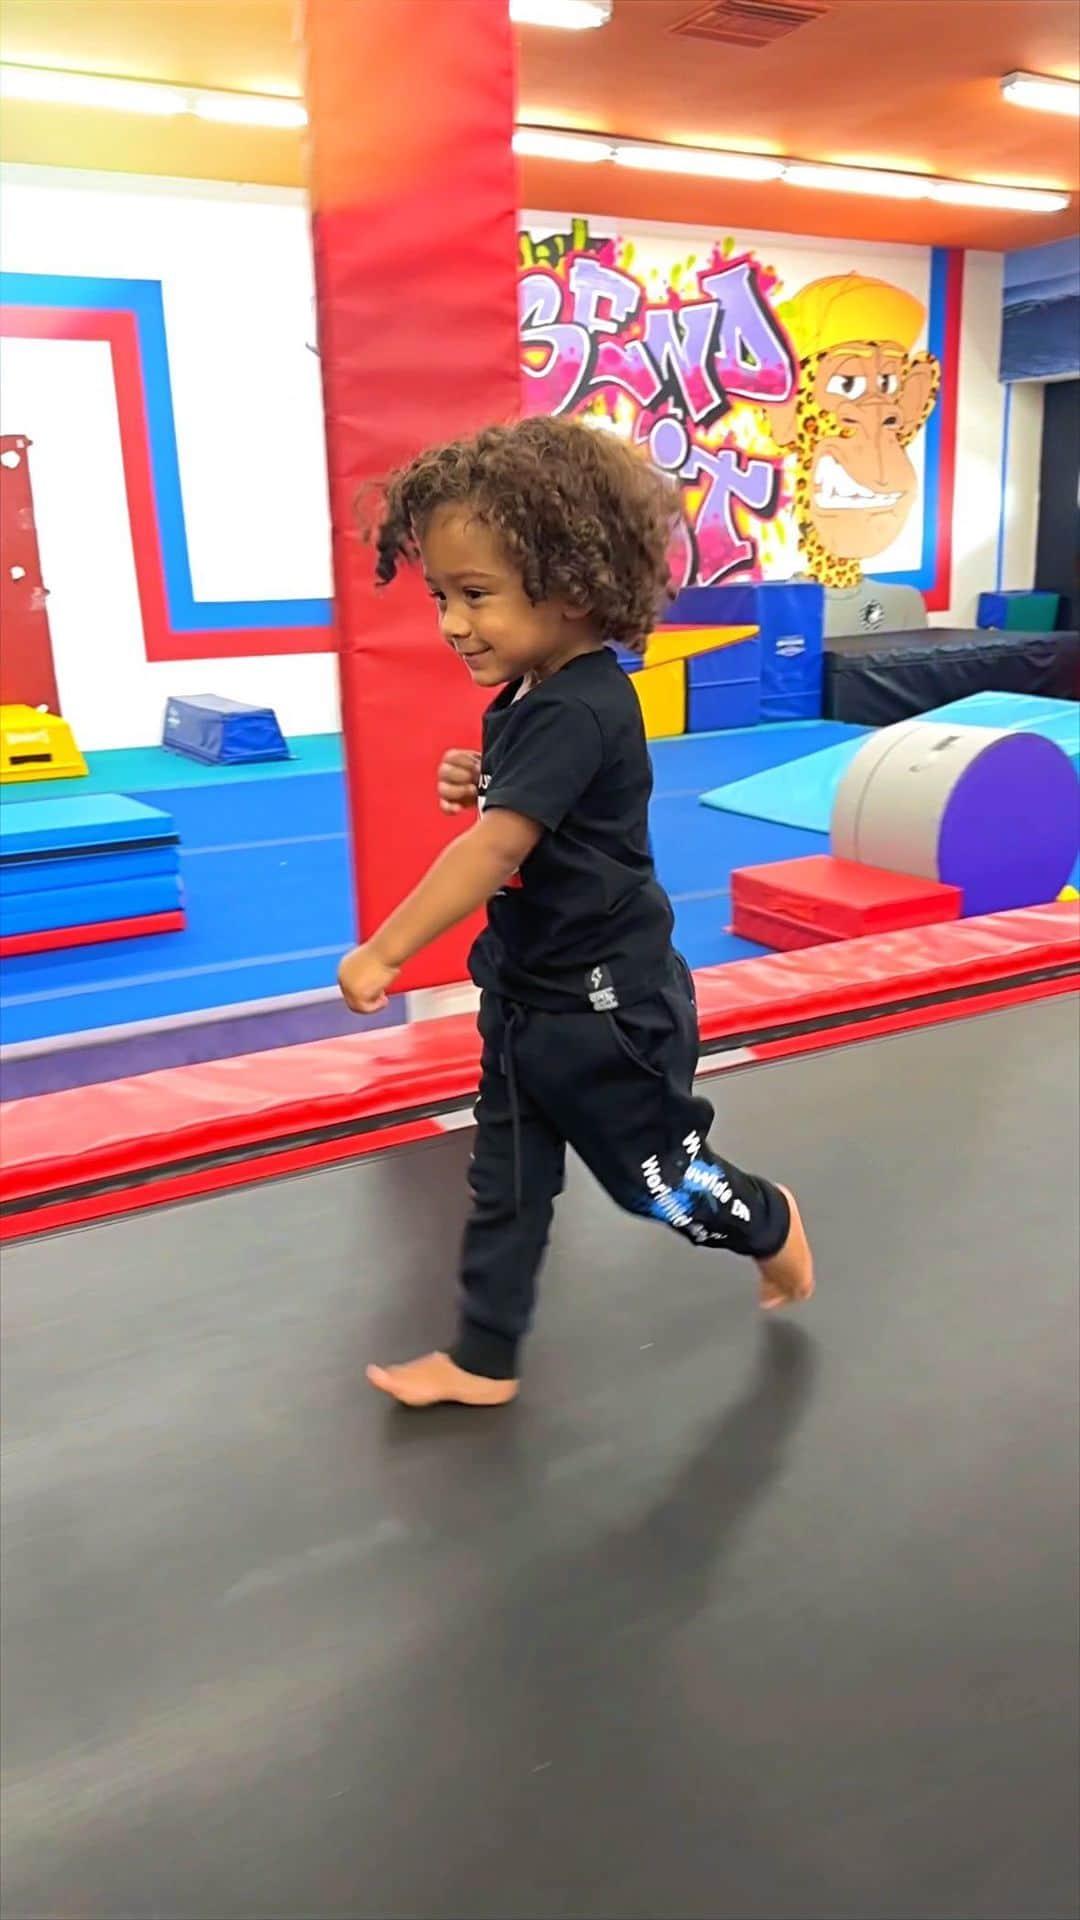 Jena Frumesのインスタグラム：「This is your sign to put your toddler in gymnastics🥰 I want to get him in more sports and activities but this was such a fun start! Safe and controlled environment he had a blast💥 I did gymnastics growing up and it was the highlight of my week so glad he’s loving it🥹🫶🏽🤸🏽‍♂️  #toddlermom #toddlergymnastics #gymnastics #toddleractivities」